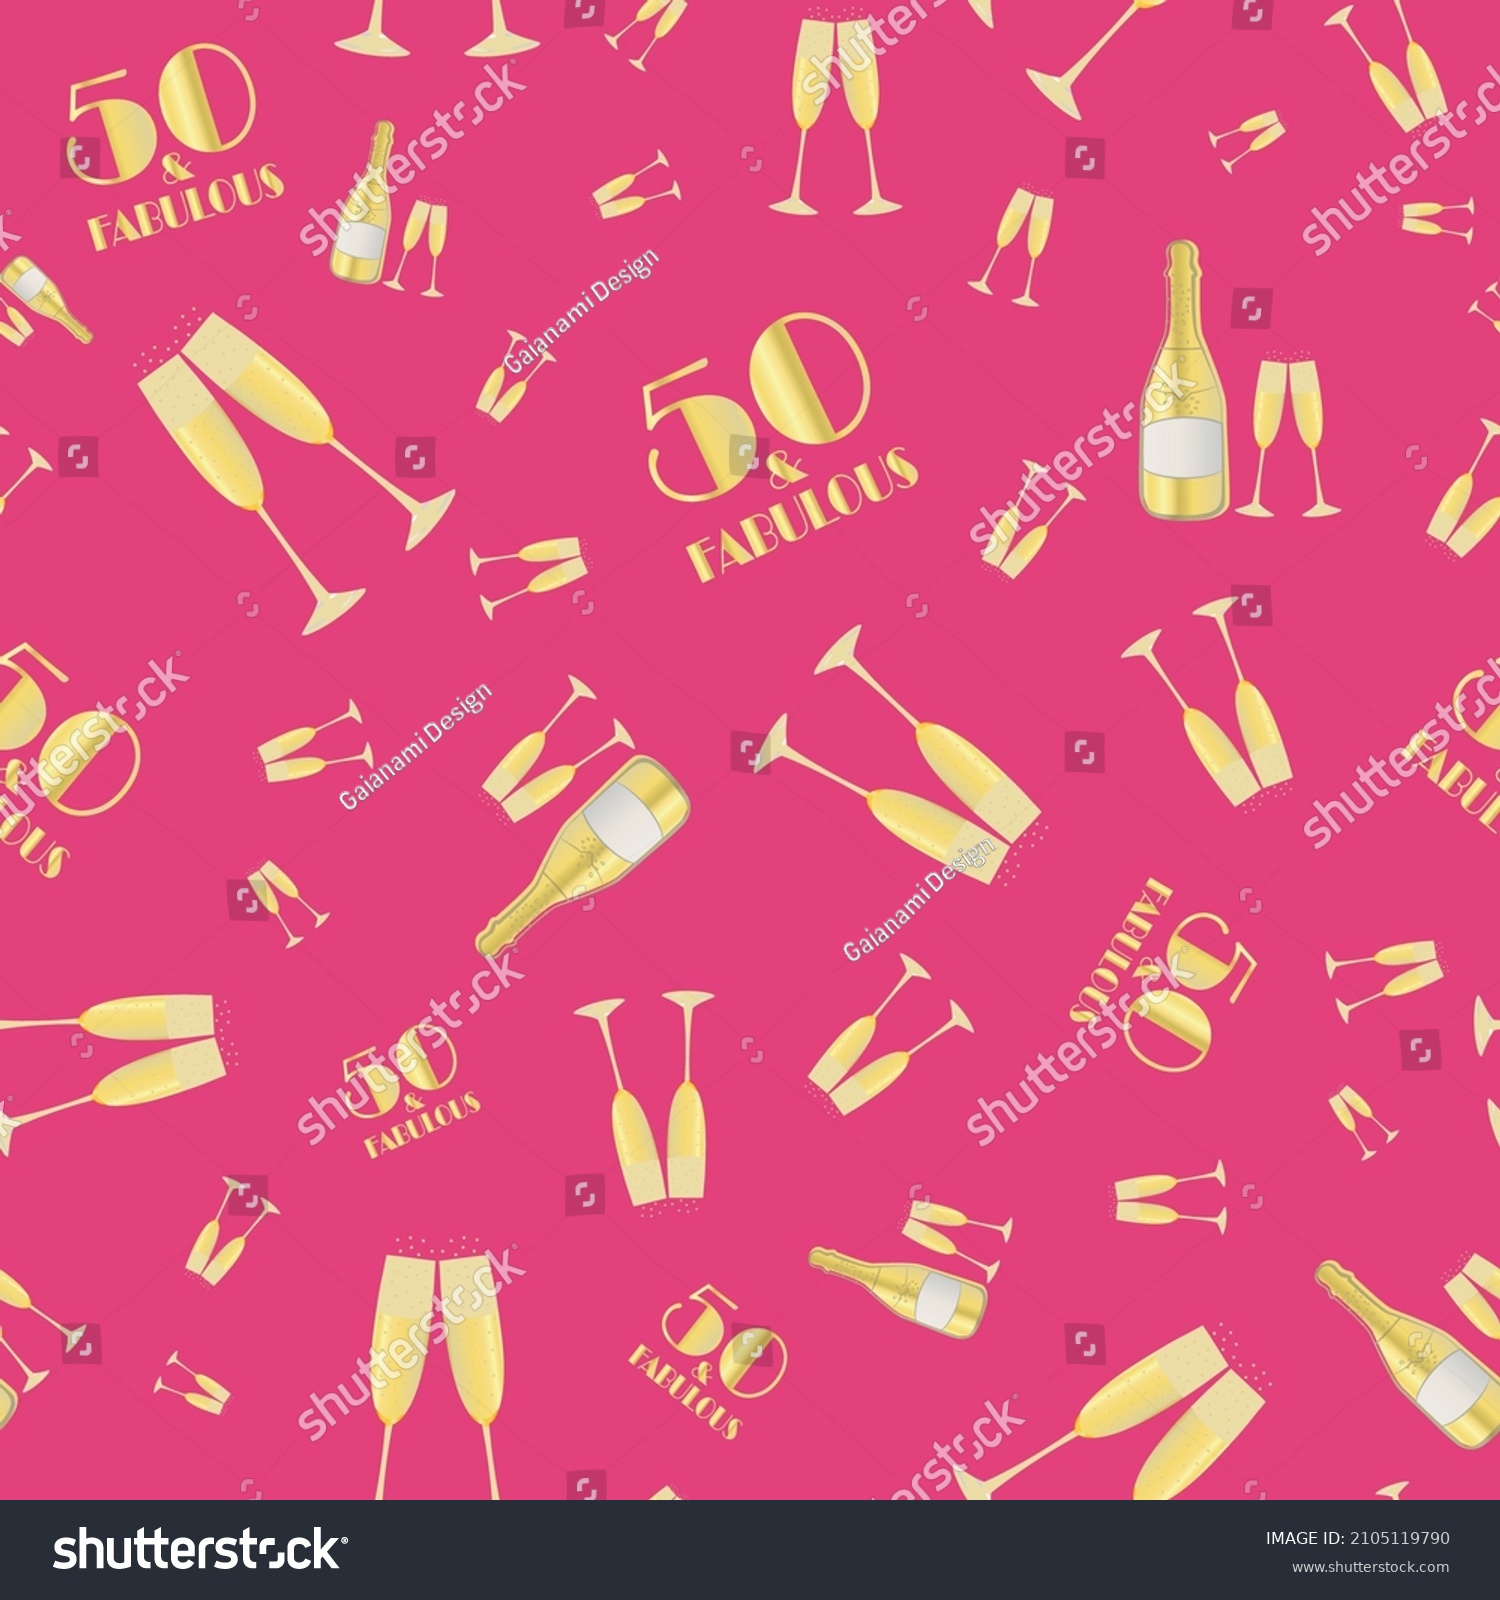 SVG of 50 and Fabulous birthday anniversary celebration vector seamless pattern with champagne bottles and glasses. Gold and hot pink background. Fizzy drinks and 1920s font. Repeat for party, business event svg